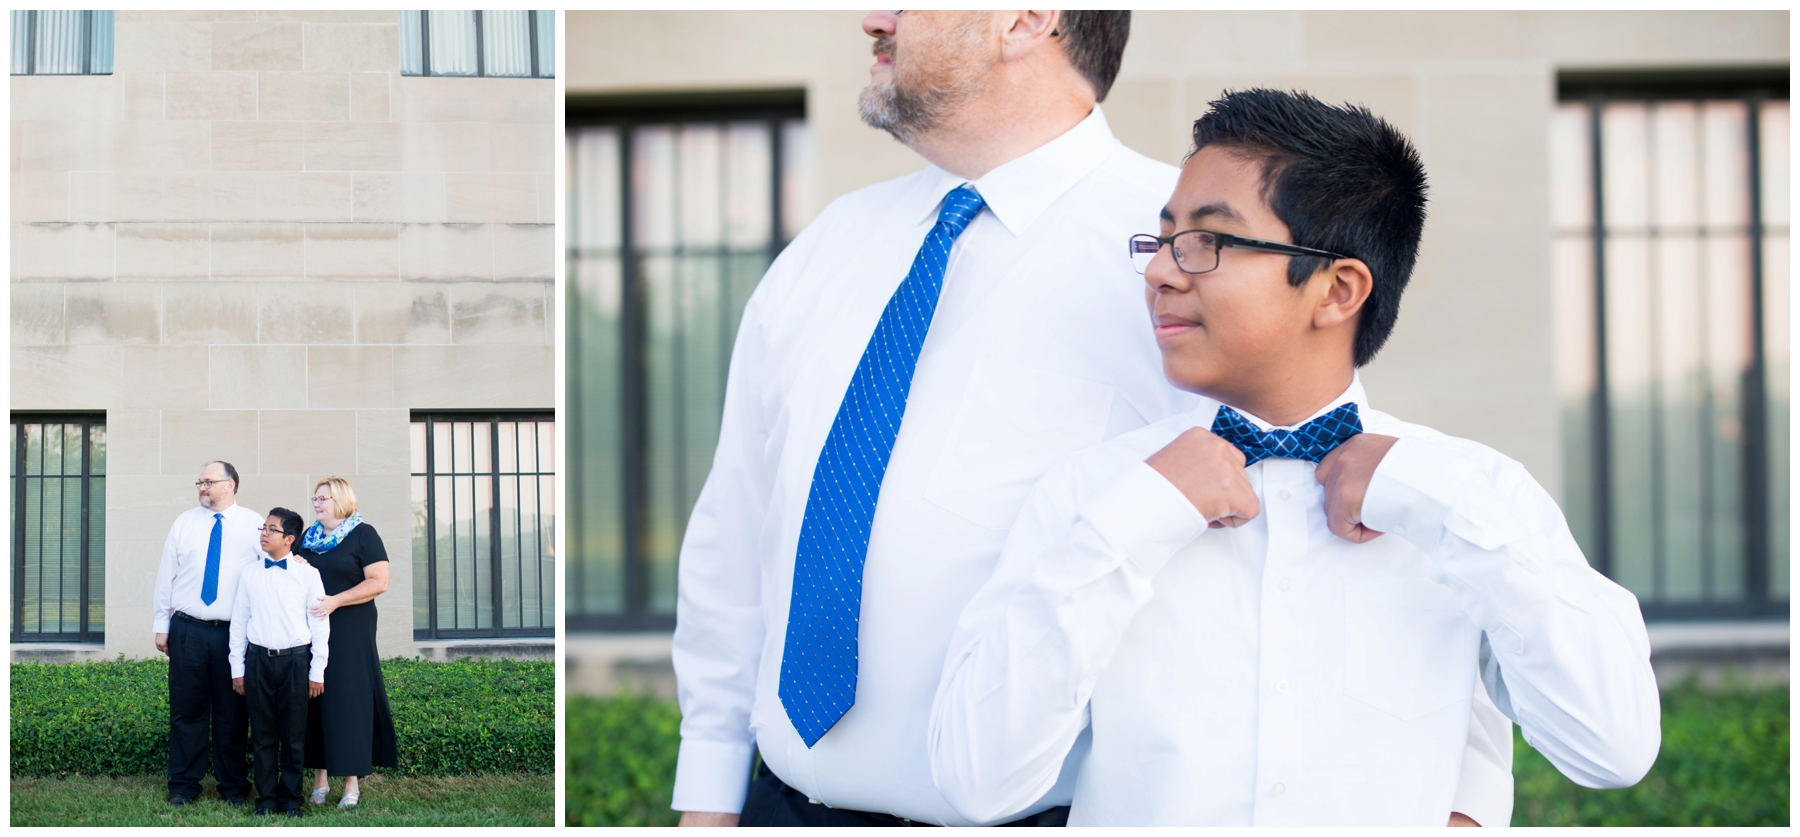 classy-bowtie-family-session-at-nelson-atkins-museum-by-lacey-rene-studios-photography_0013